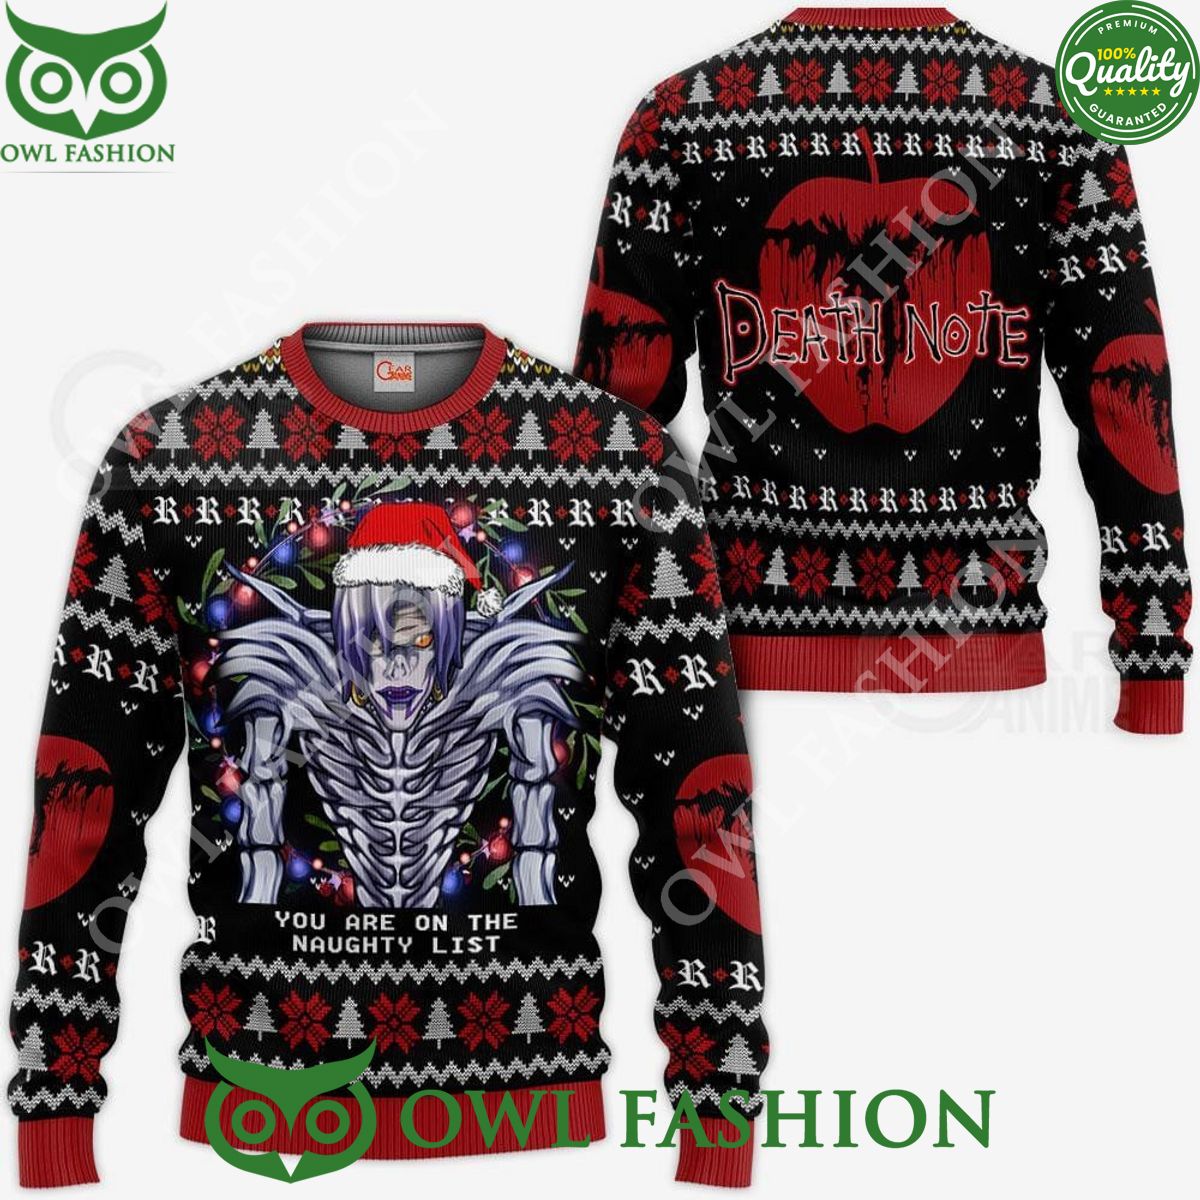 shinigami rem ugly christmas sweater dnote xmas gift death note jumper 1 l9lon.jpg